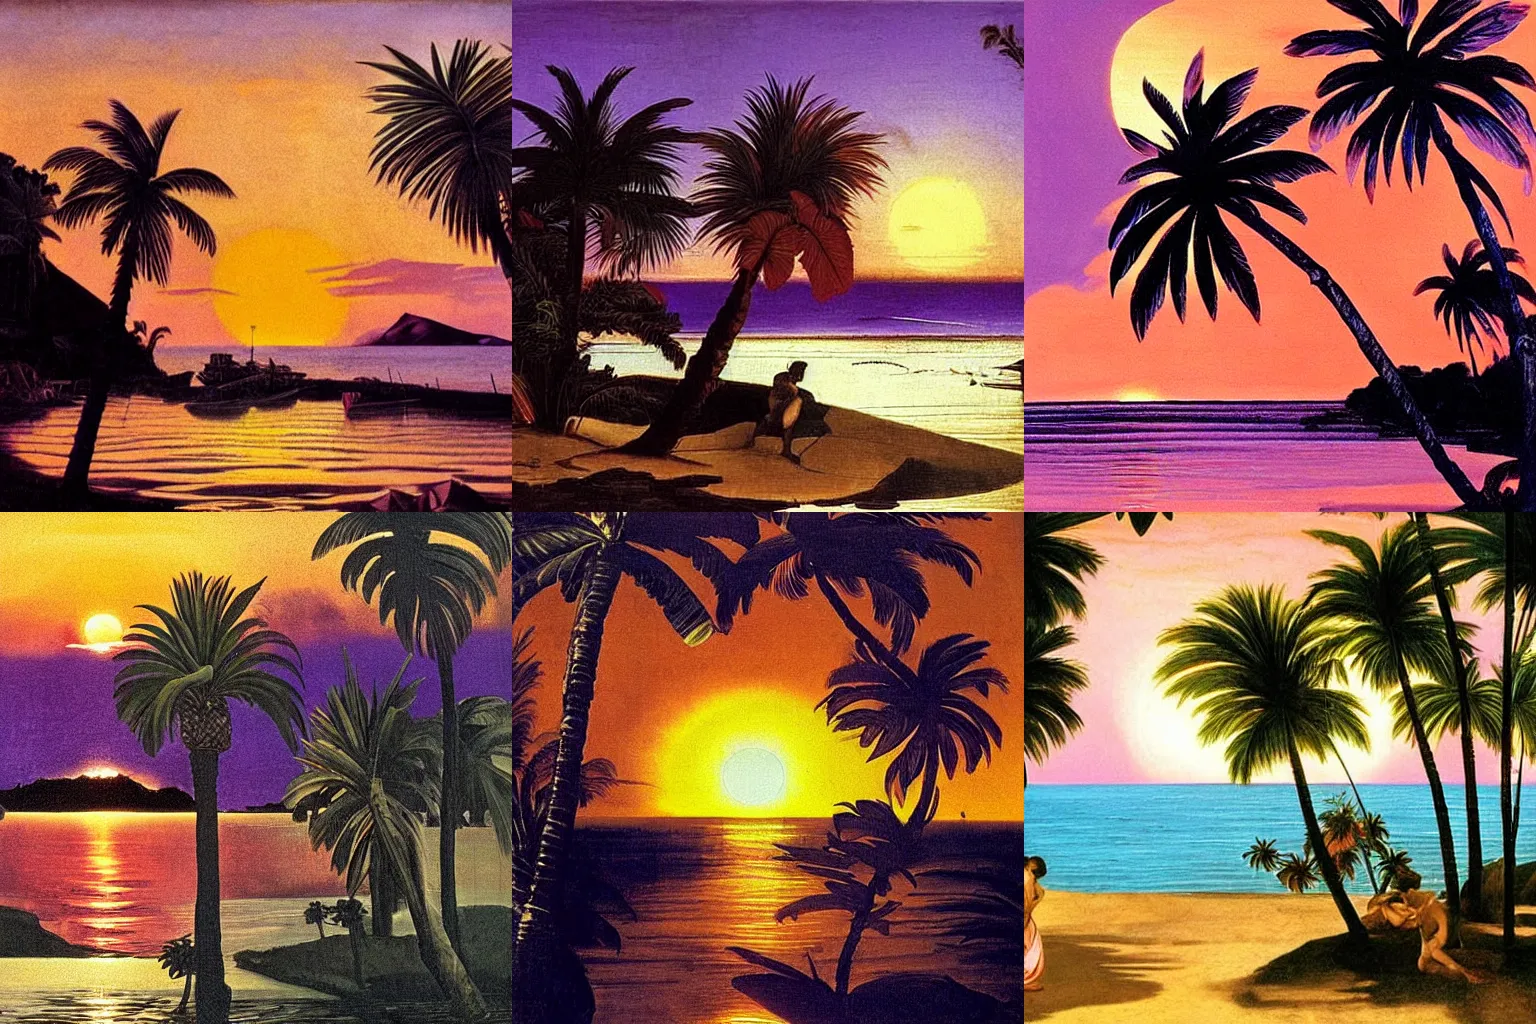 Prompt: The sun setting over an island with palm trees and a purple orange pink glow, tropical, painting by caravaggio